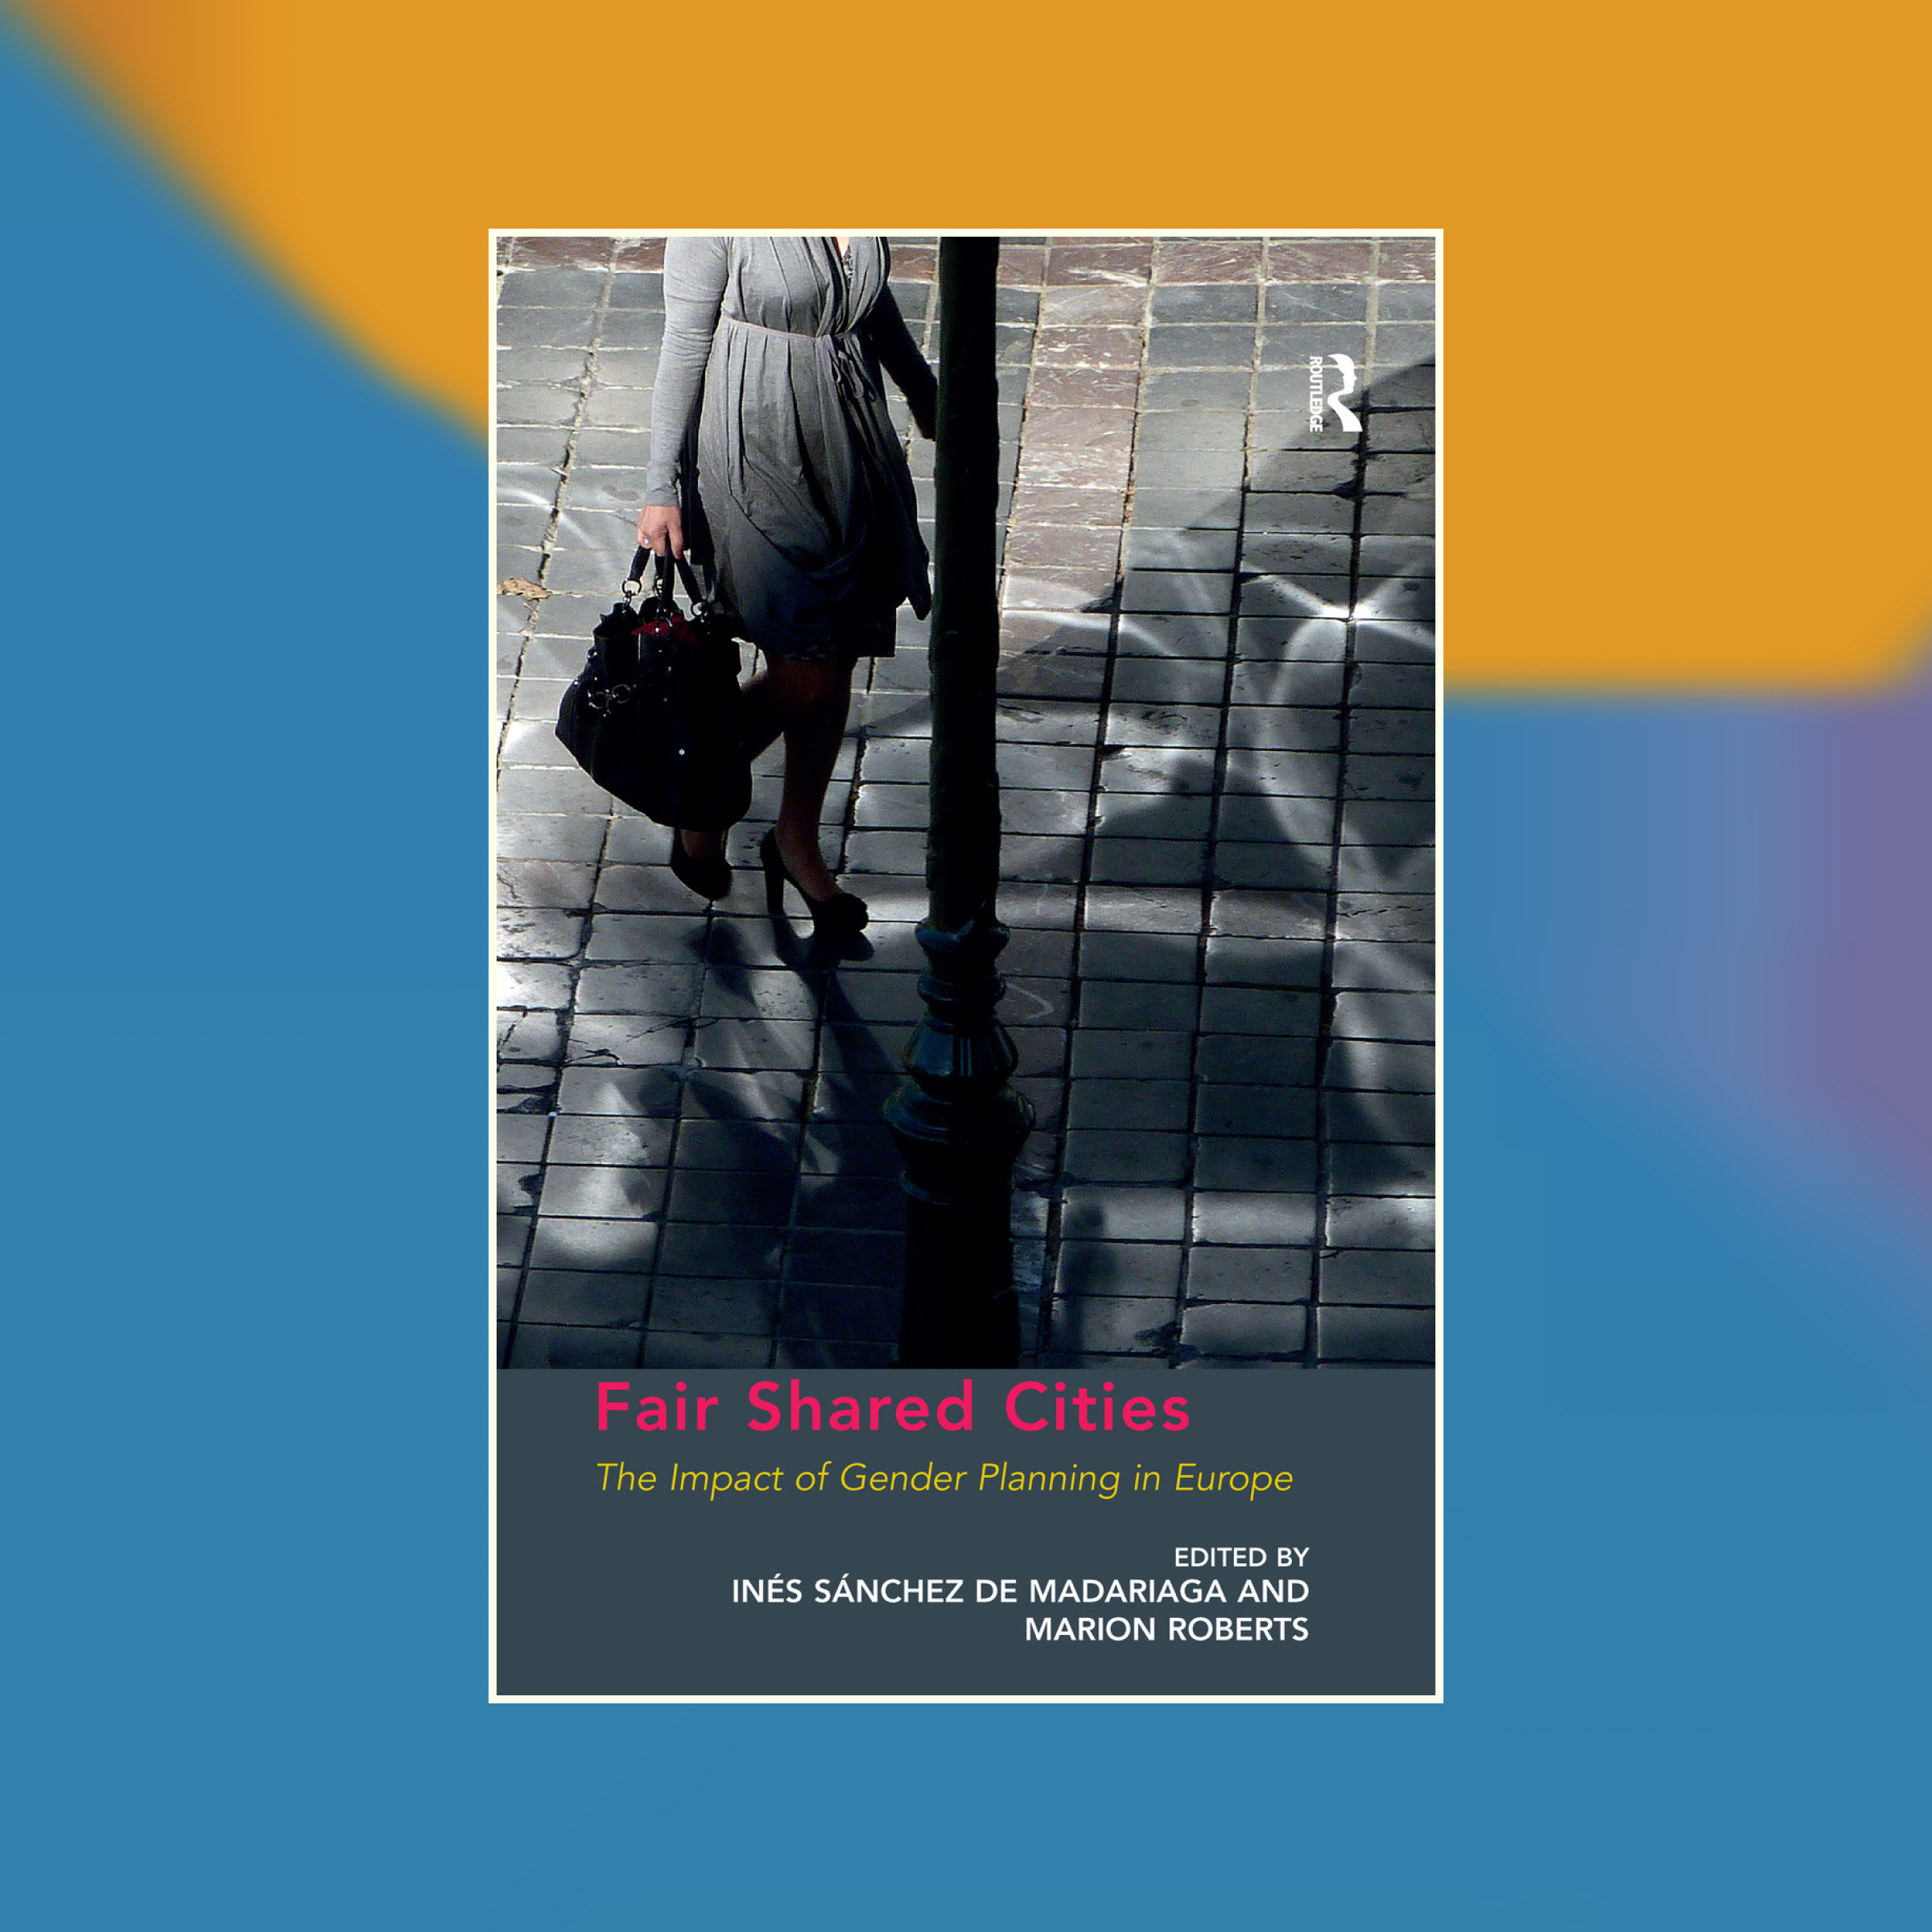 Book cover of Fair Shared Cities against an abstract painted background